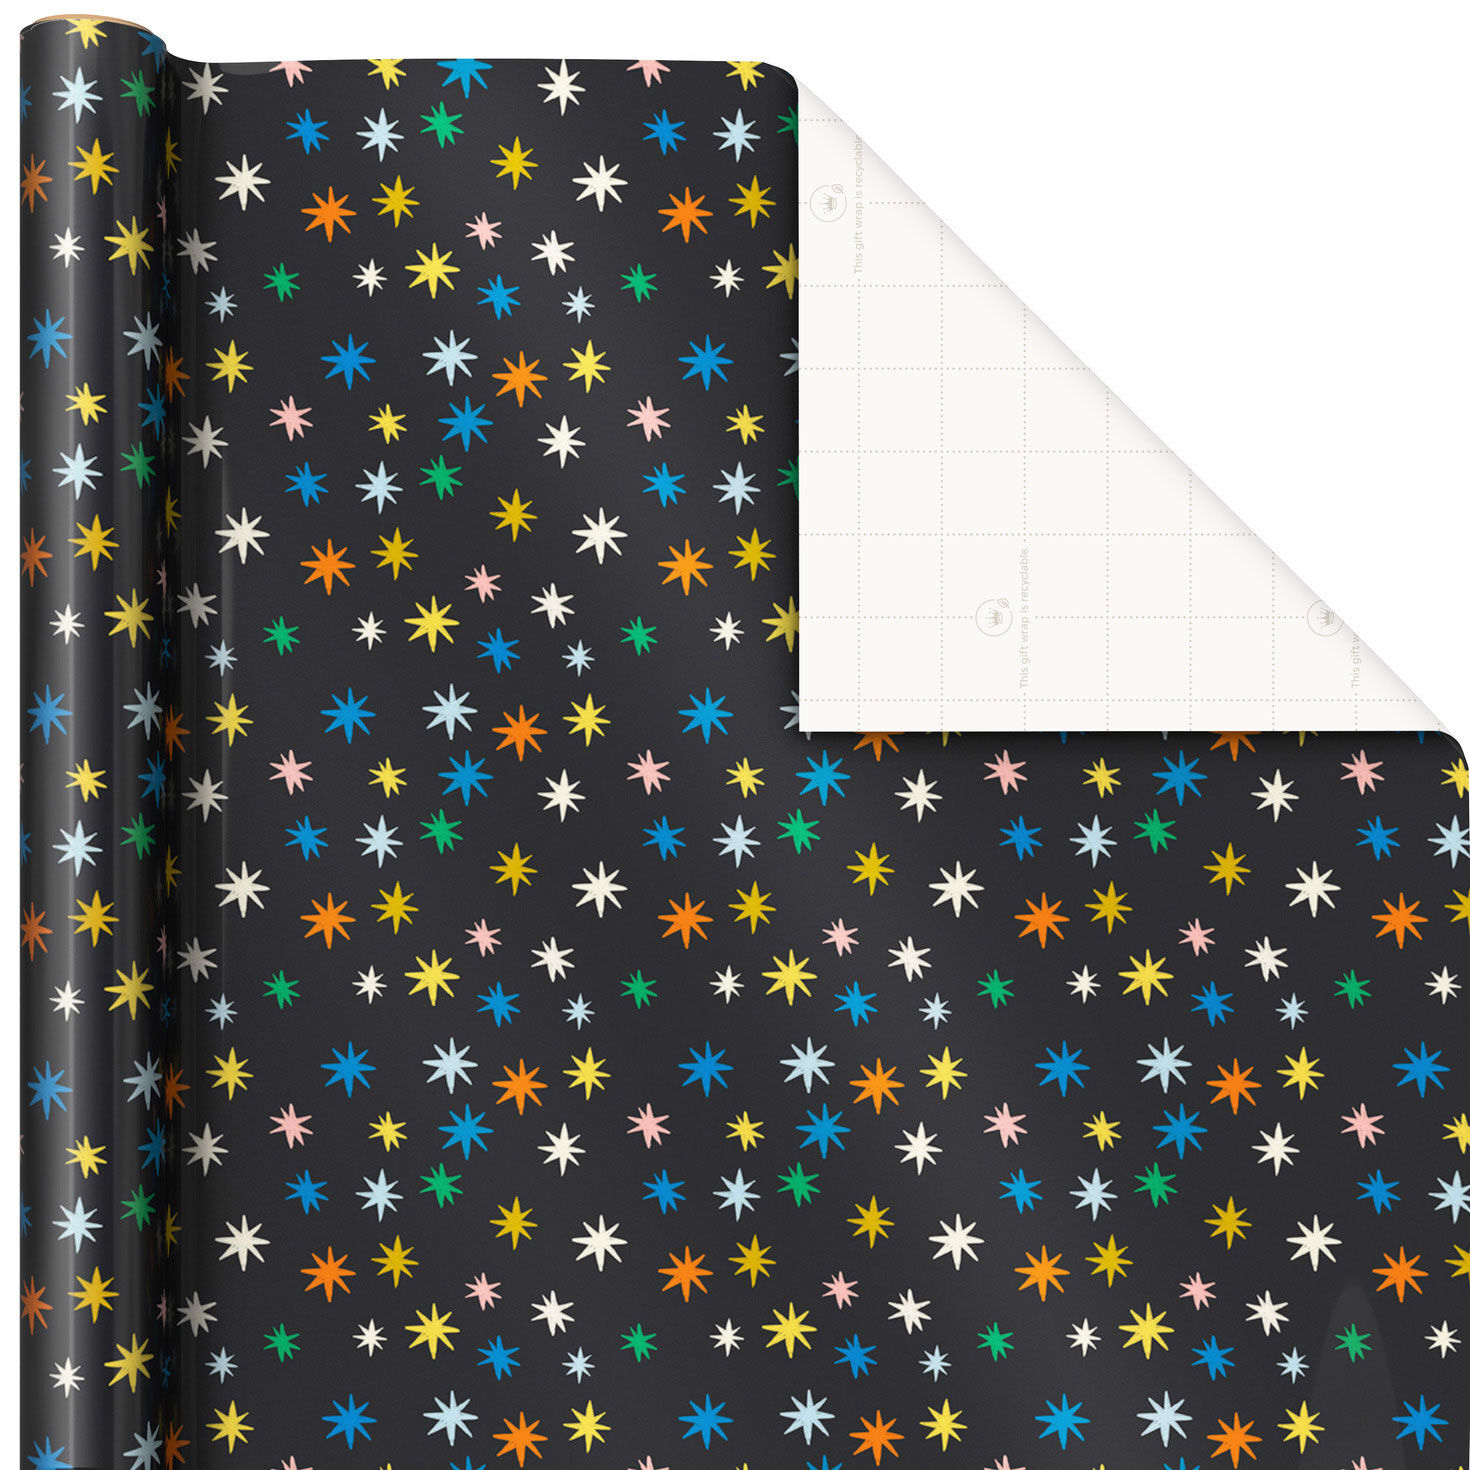 Colorful Stars on Black Wrapping Paper, 20 sq. ft. - Wrapping Paper -  Hallmark